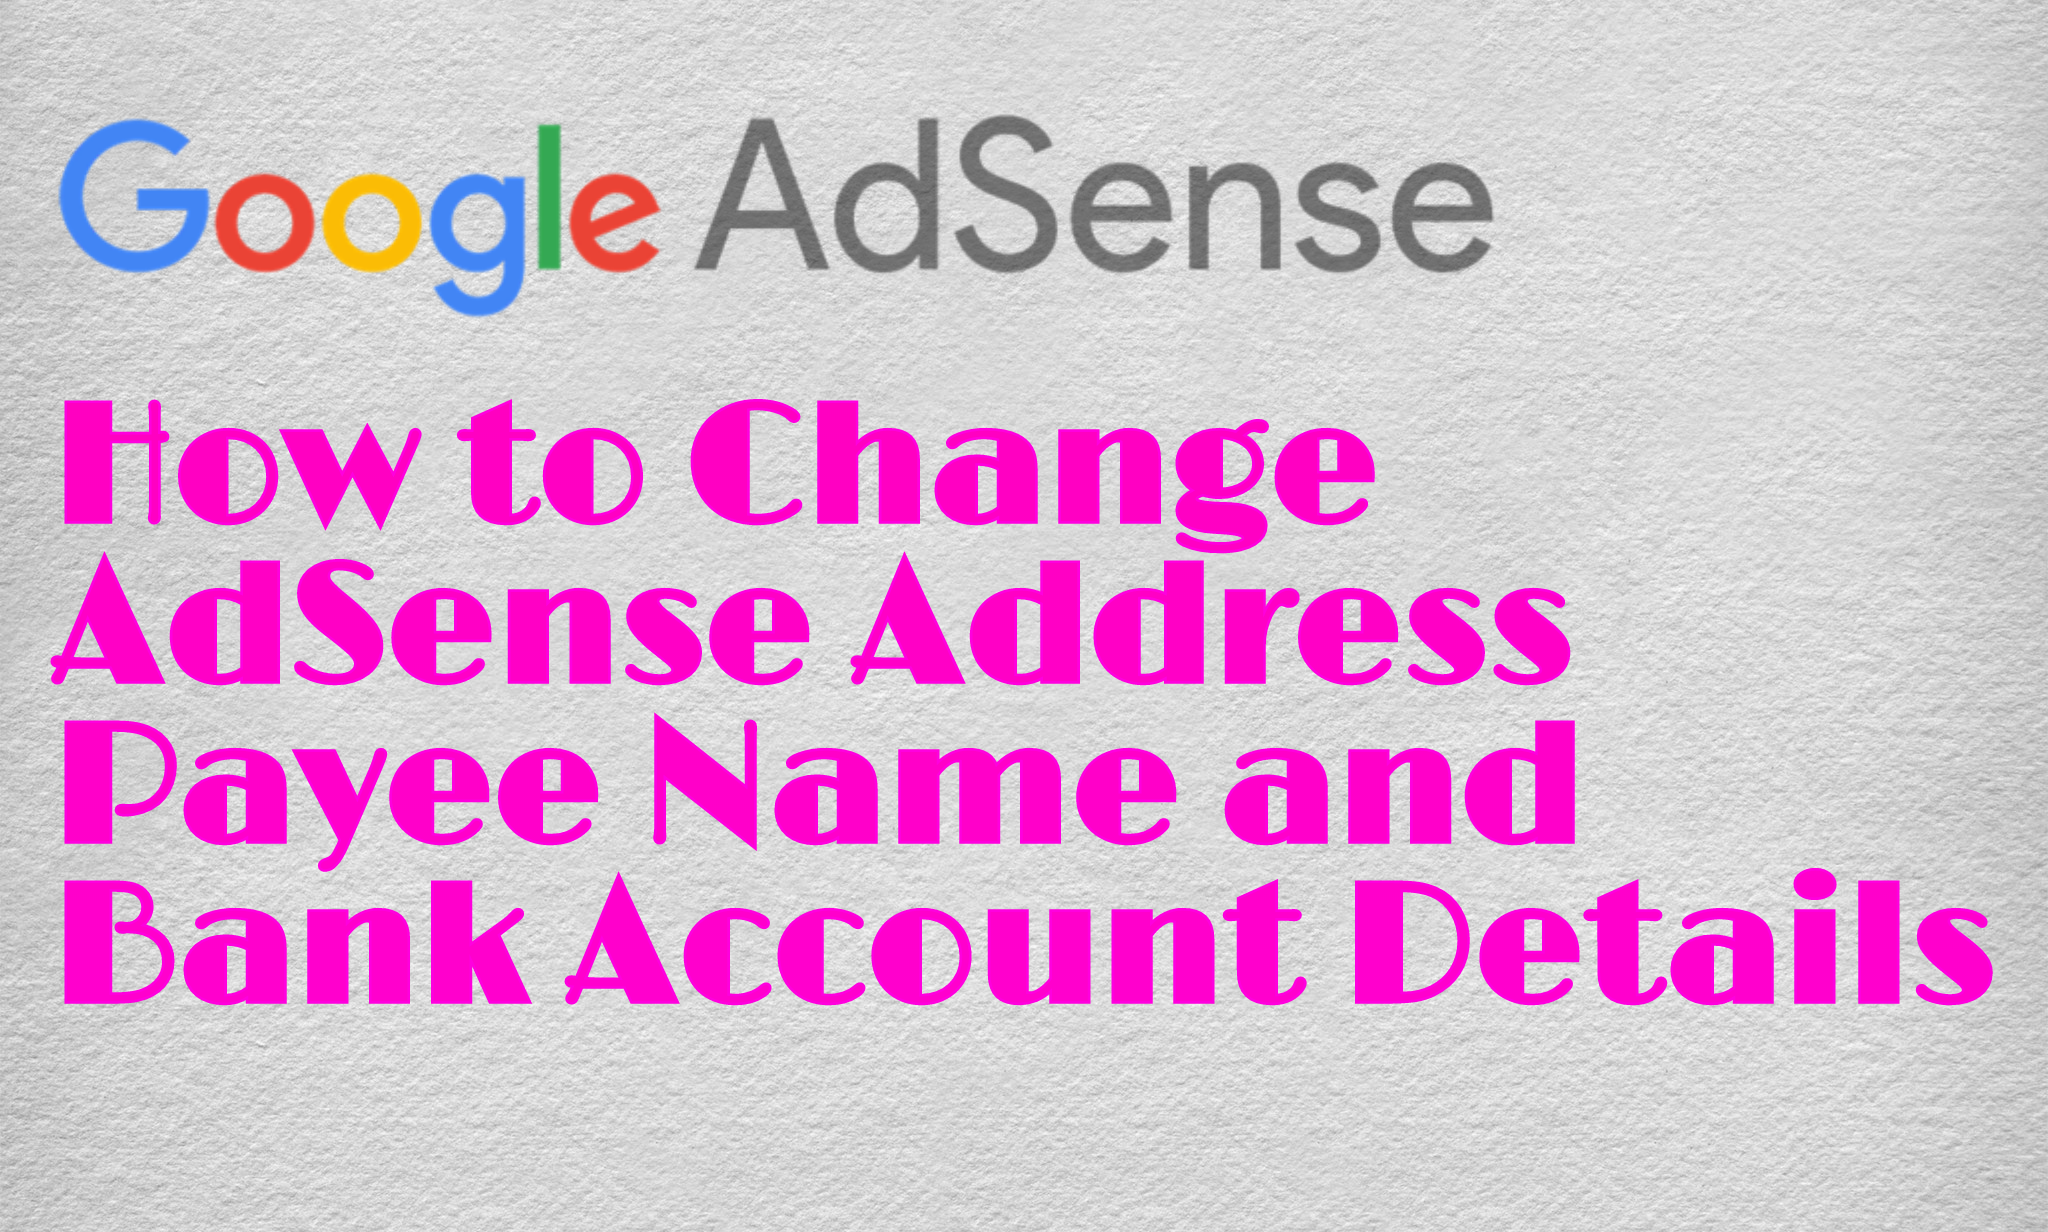 how to change adsense address, payee name, bank account details